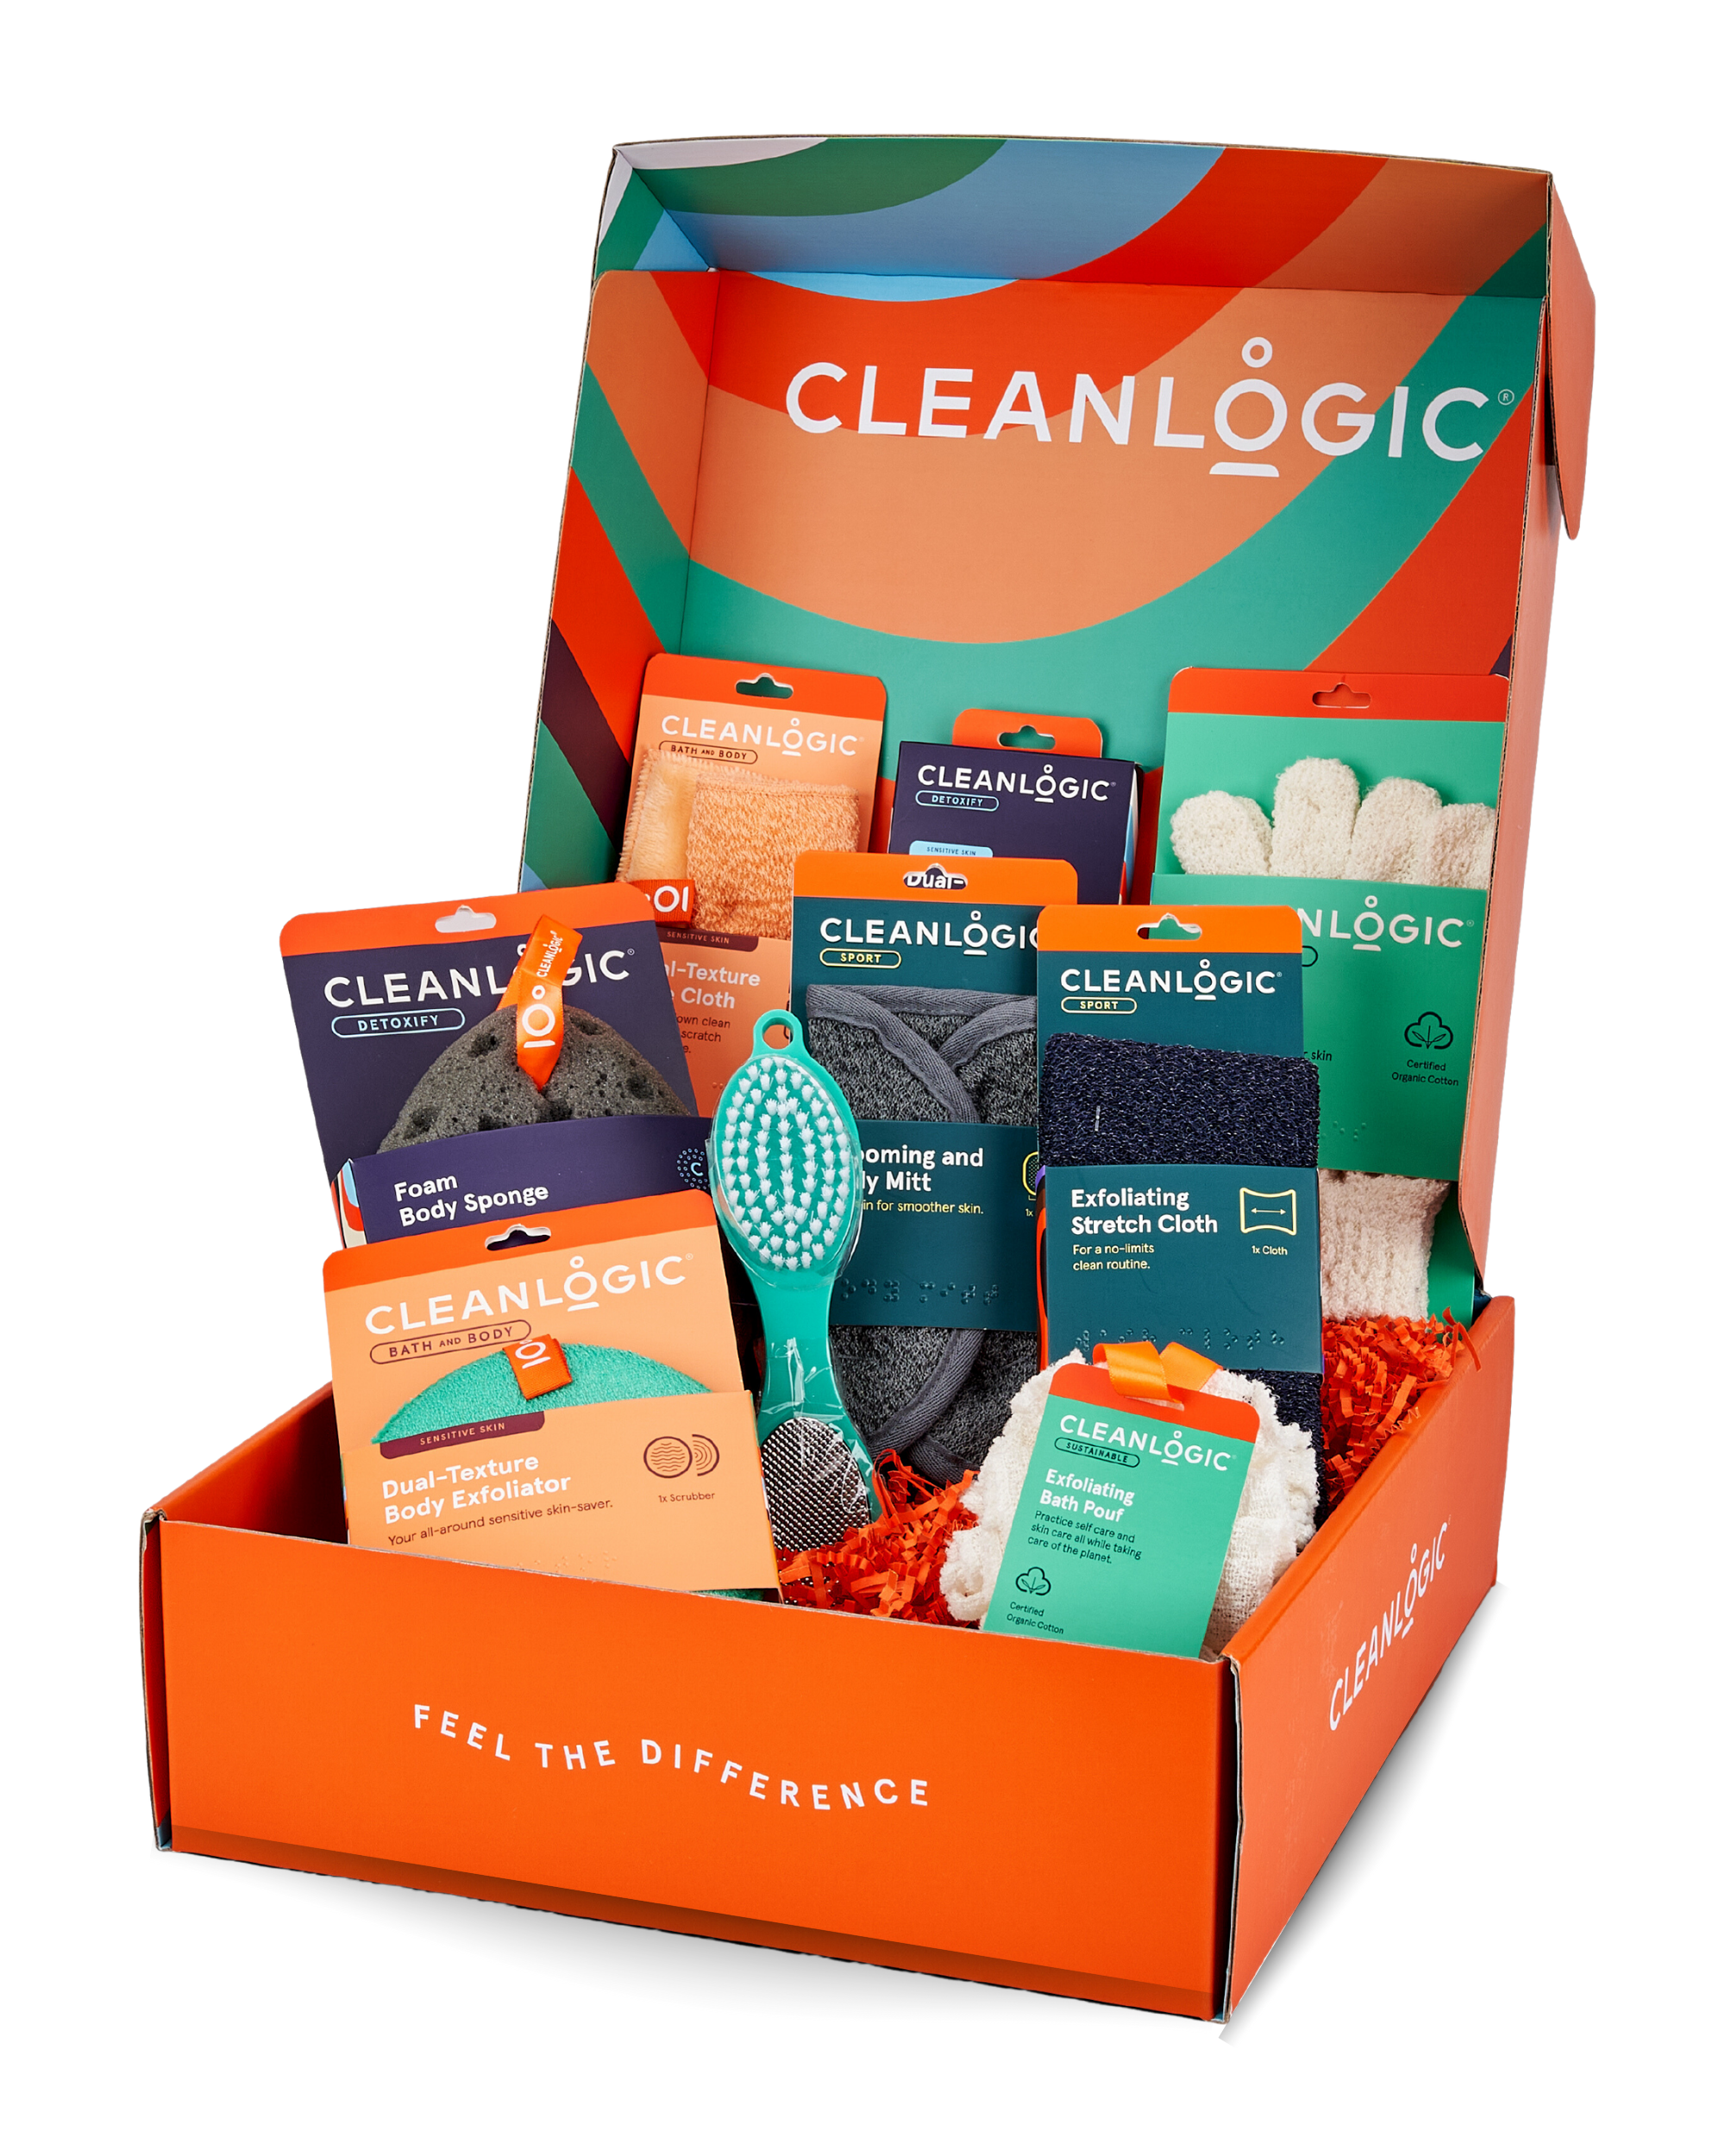 Home Essentials Bundle – Therapy Clean